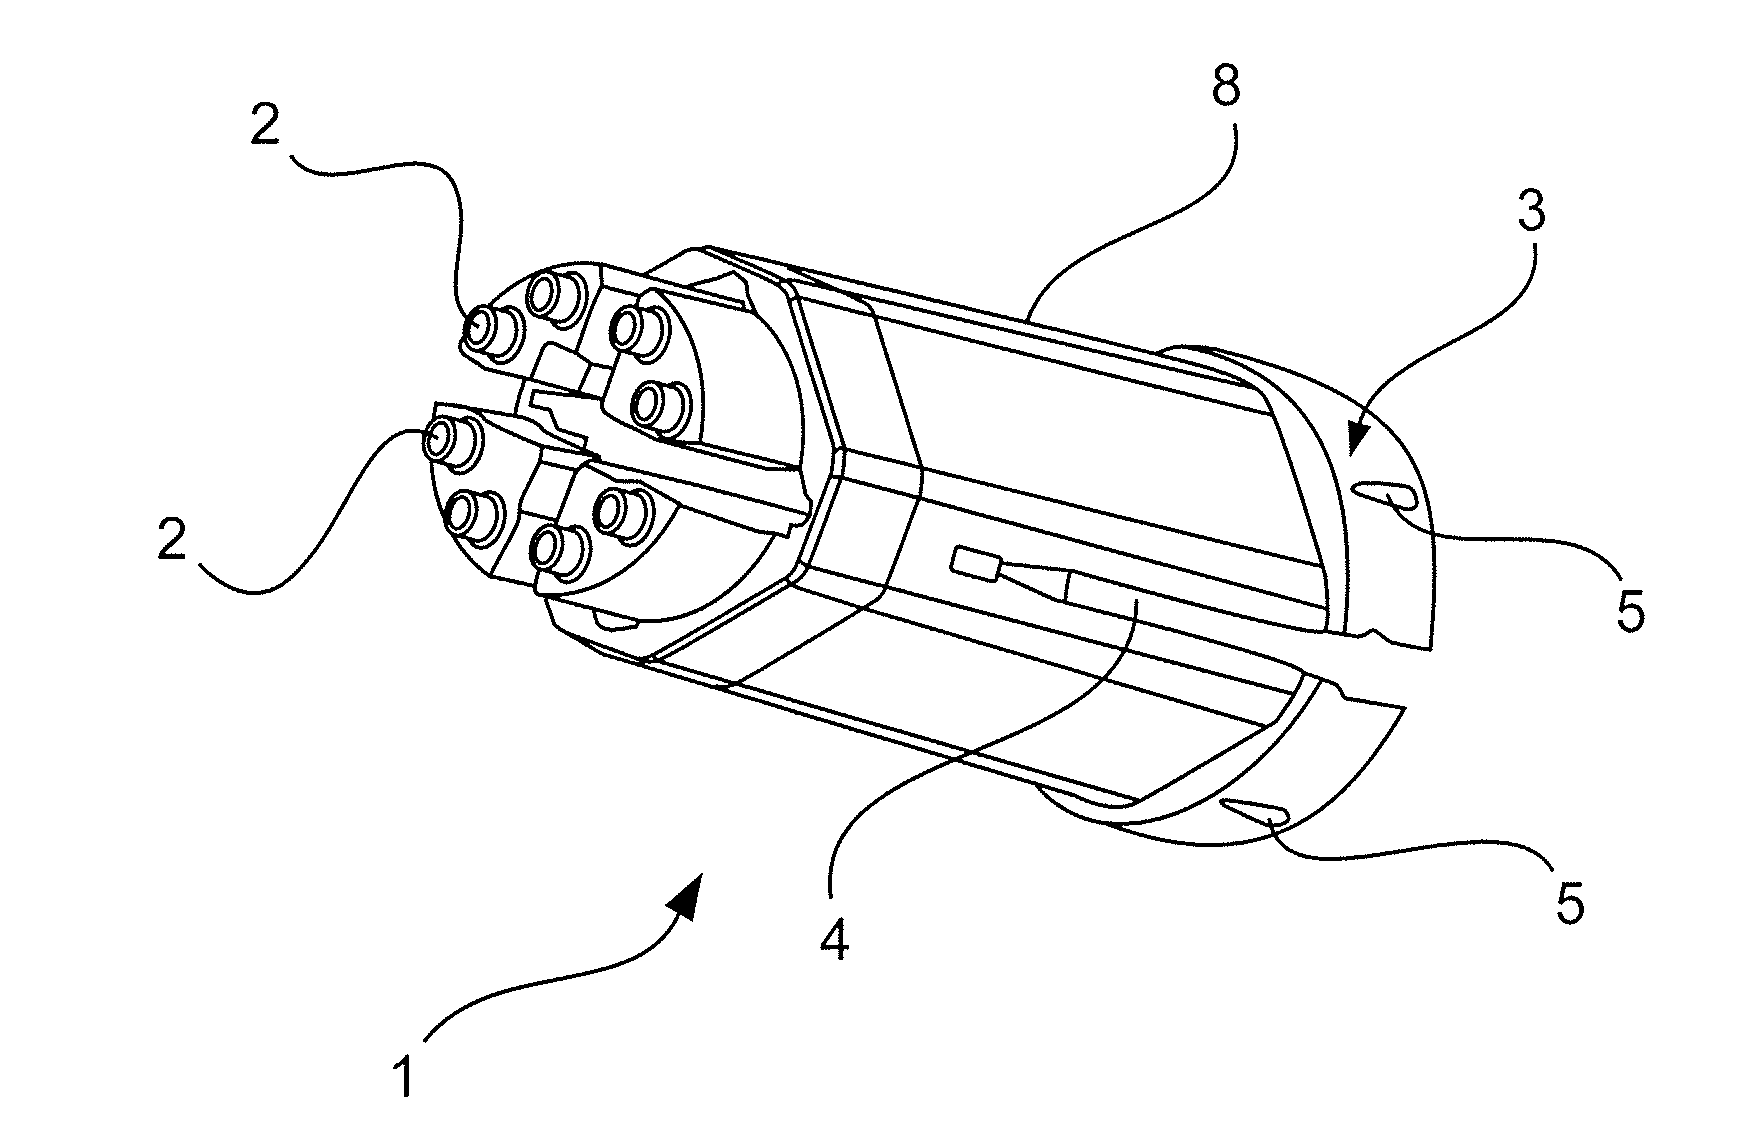 Insulation insert with an integrated shielding element